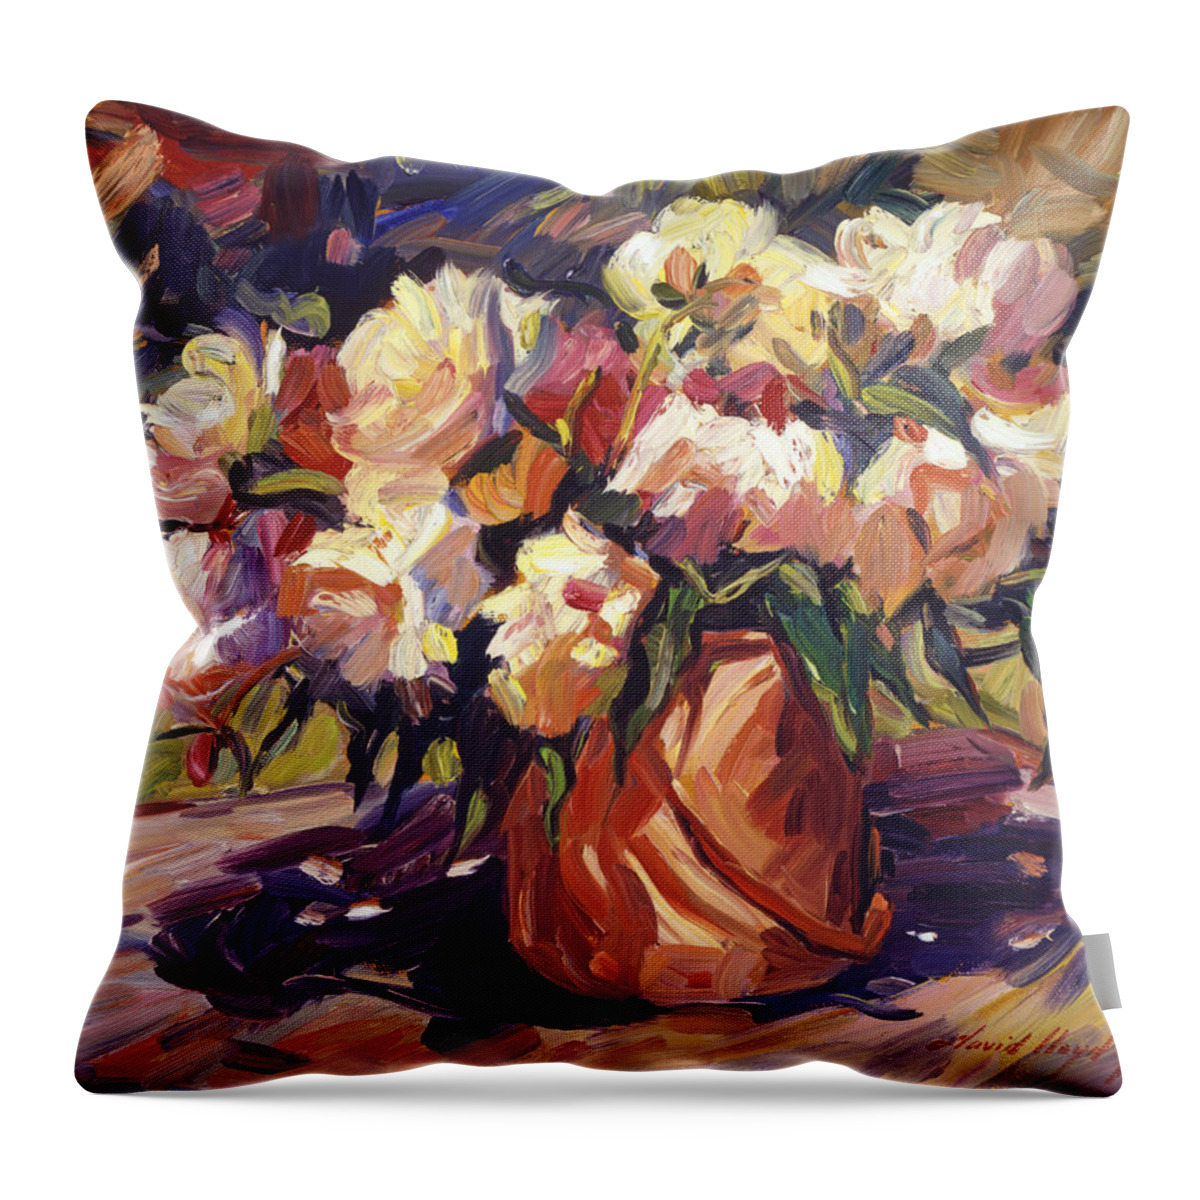 Still Life Throw Pillow featuring the painting Flower Bucket by David Lloyd Glover